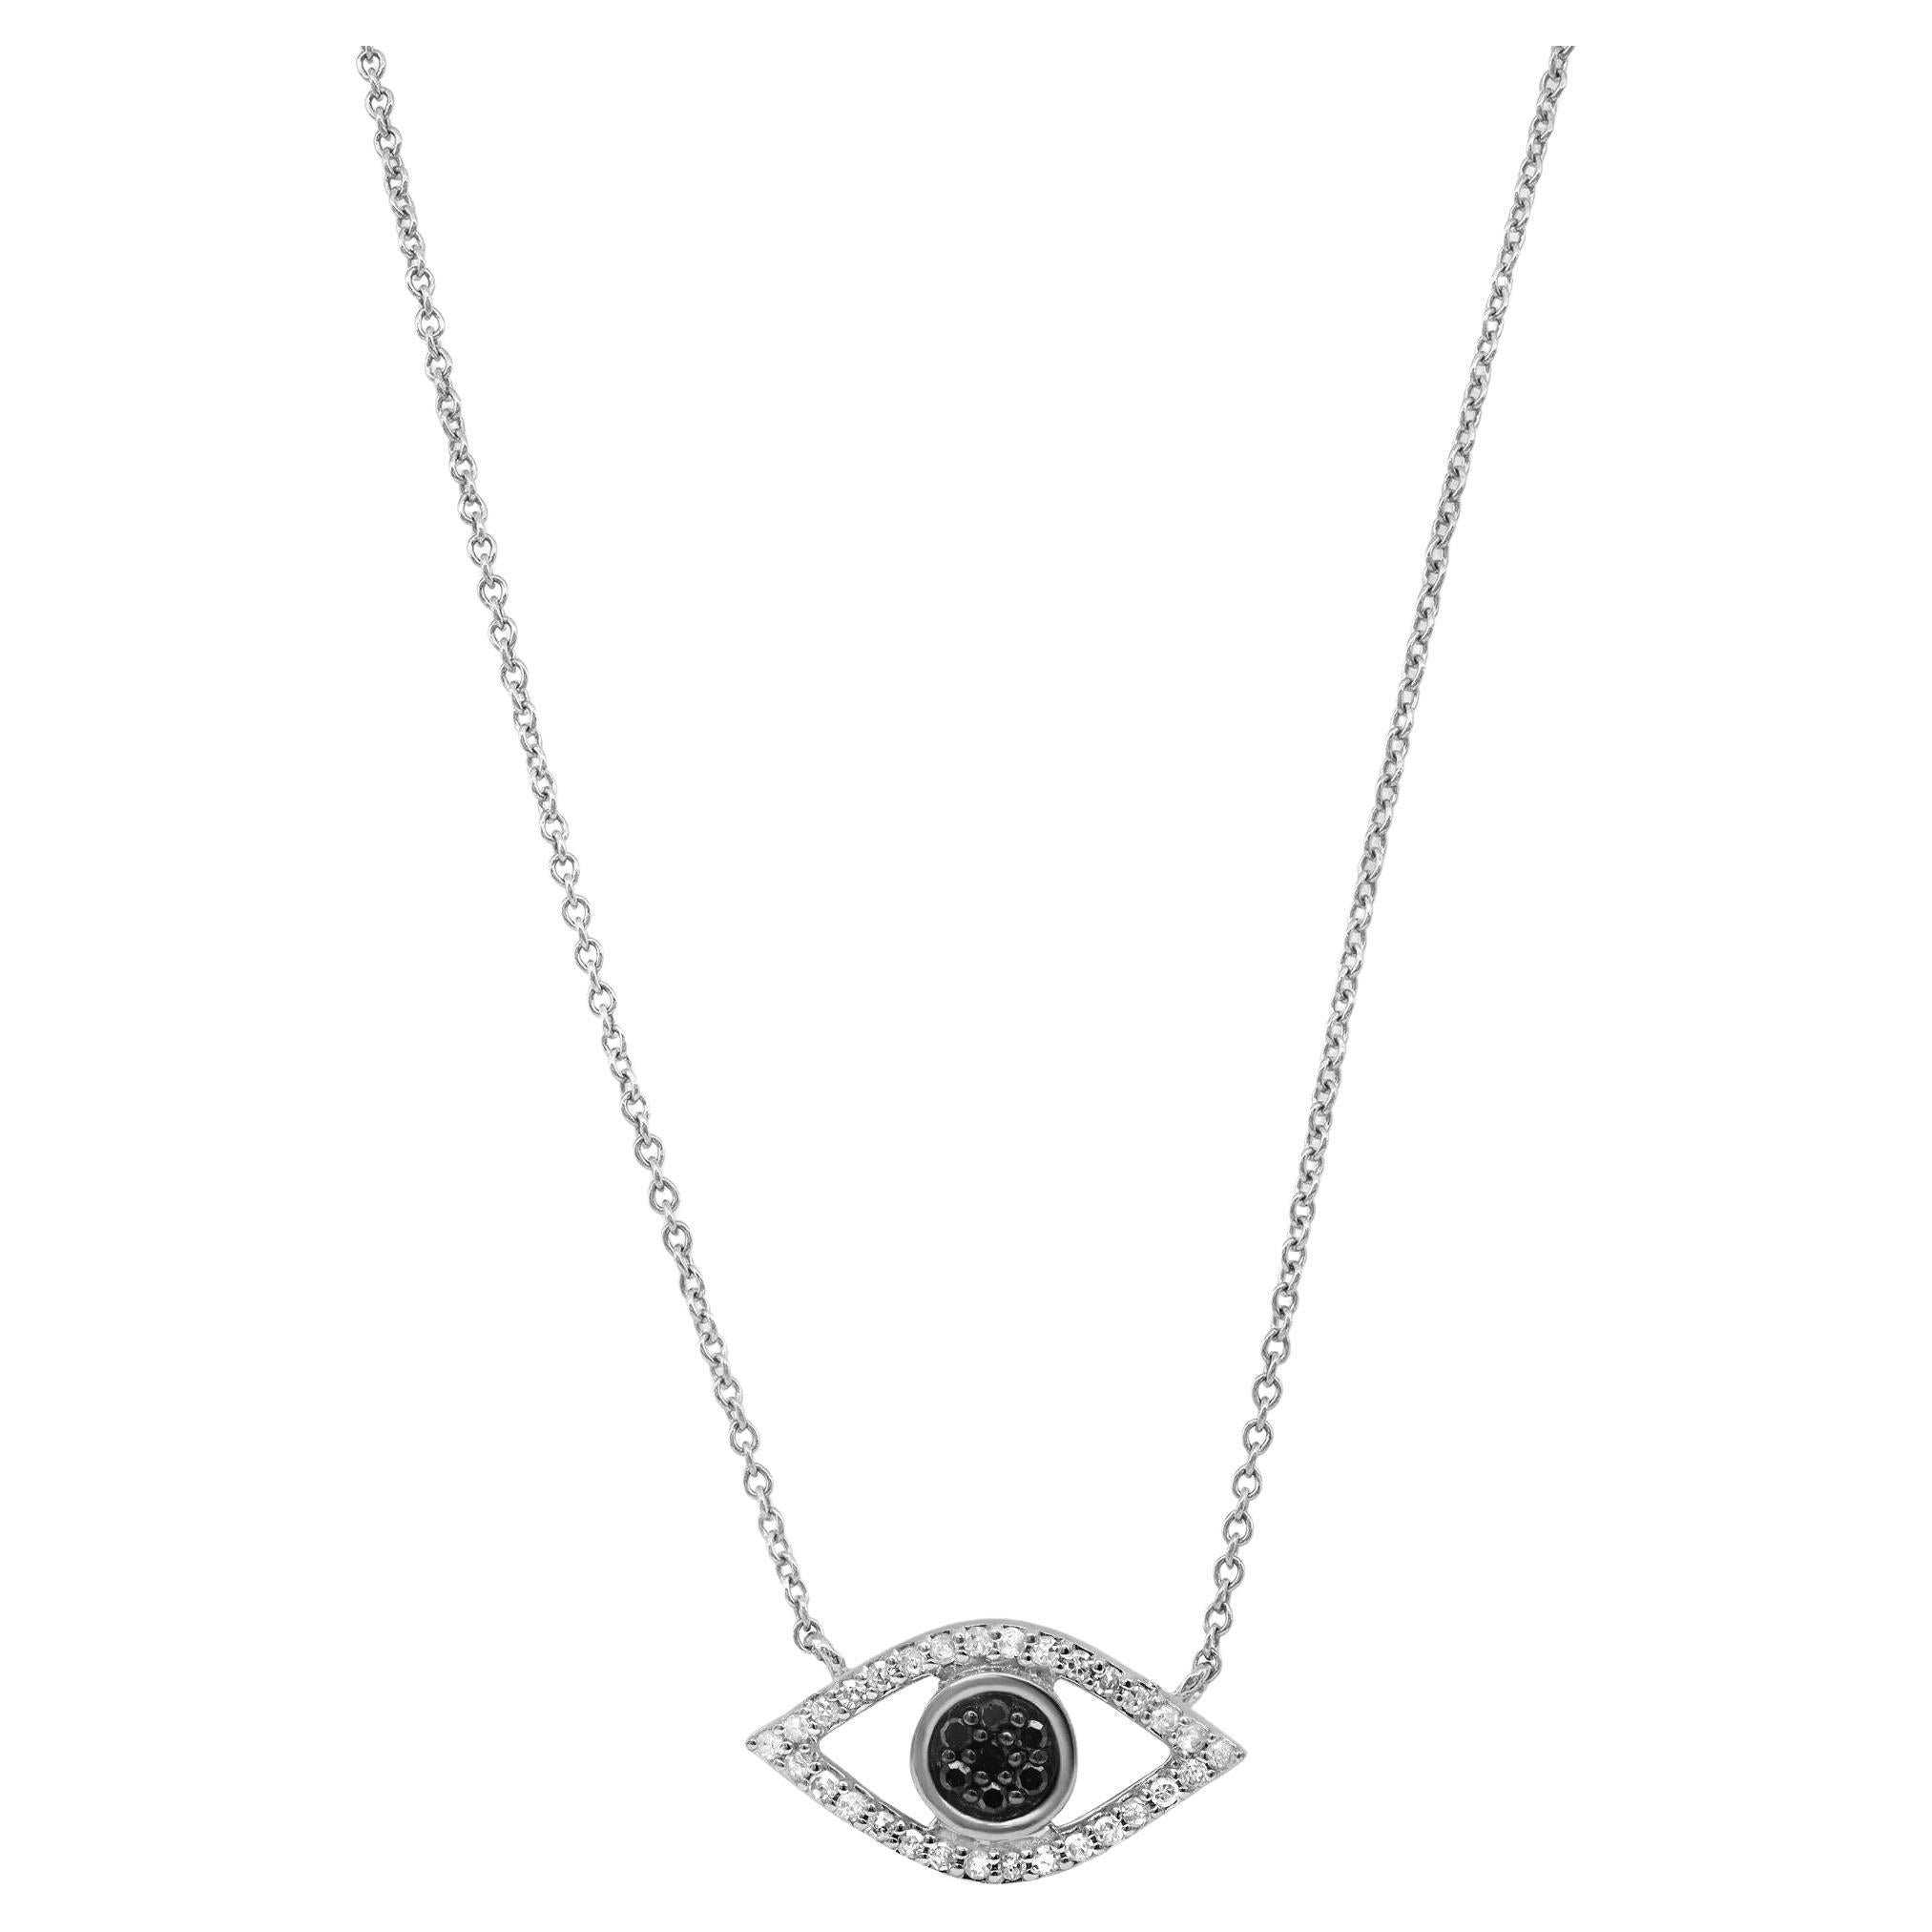 Evil Eye Pave Diamond Pendant Necklace In 14K White Gold 0.18Cttw For Sale